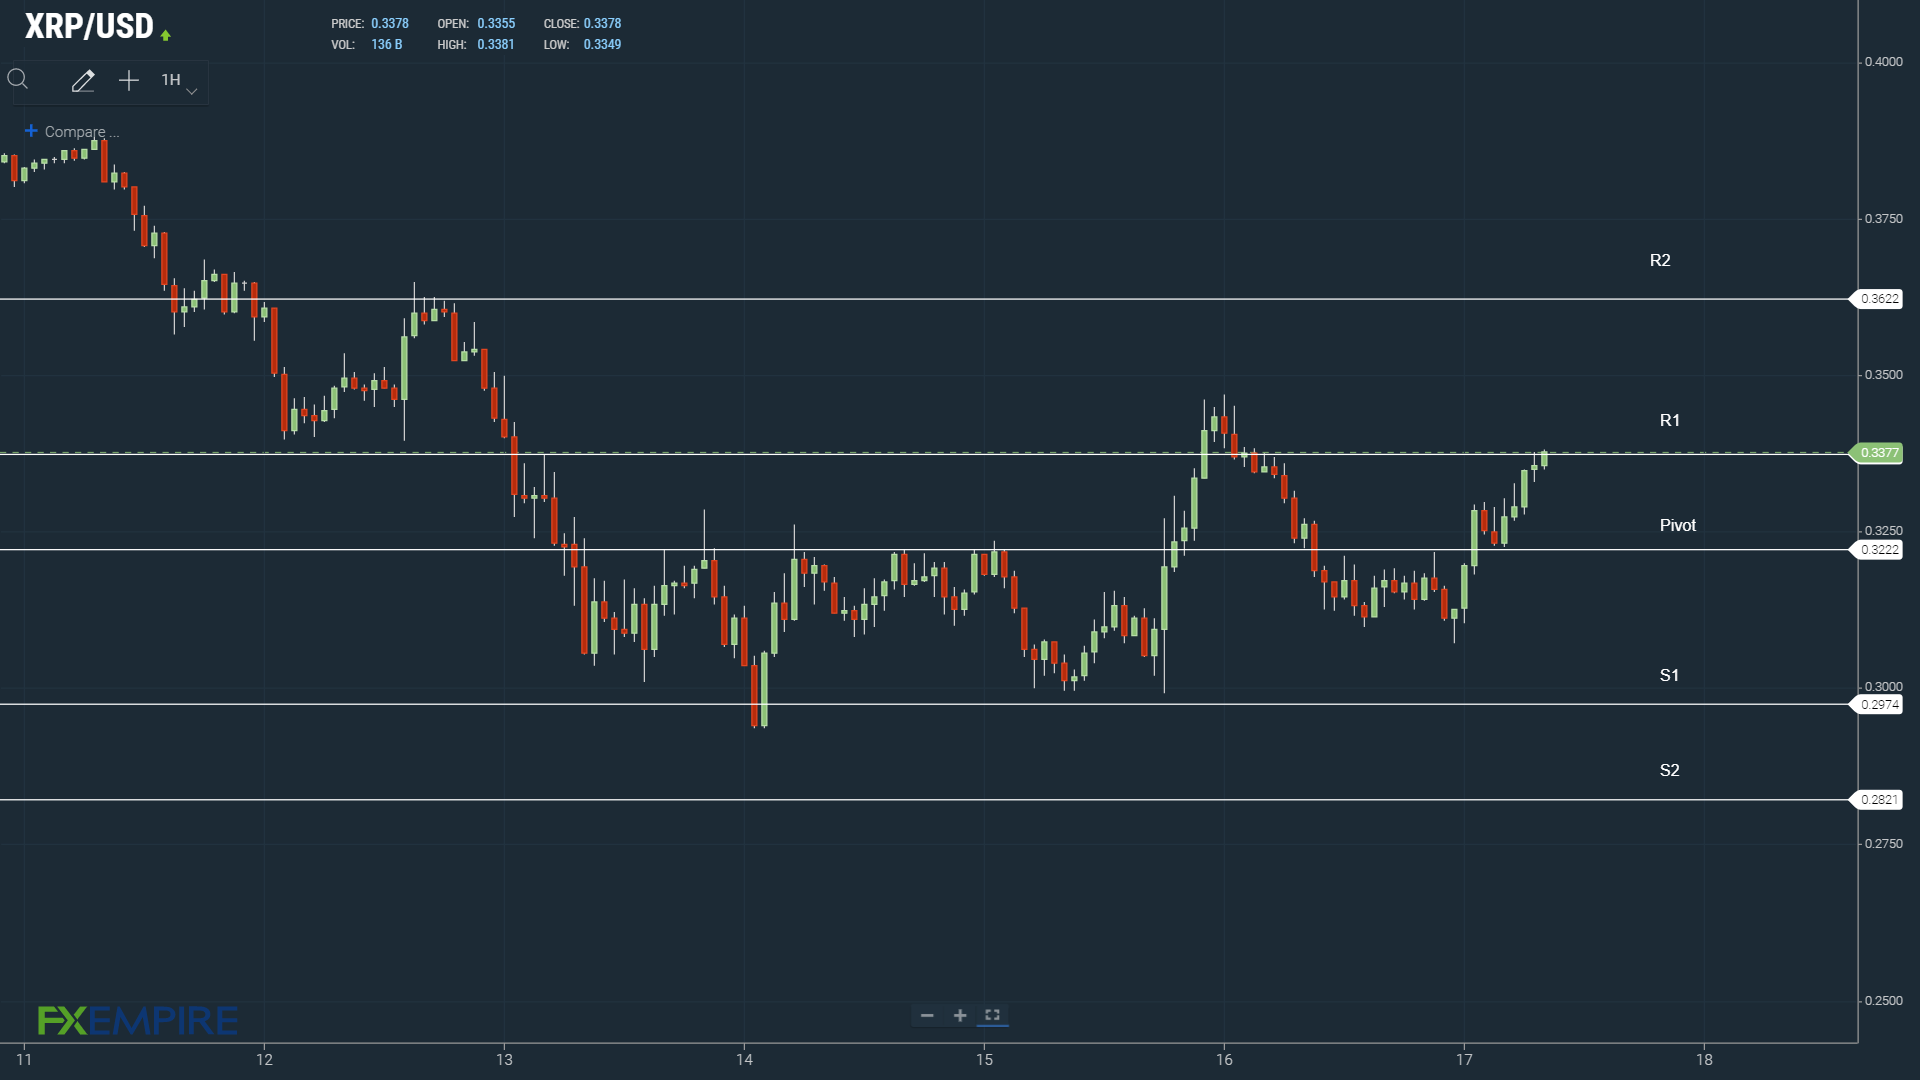 XRP tests resistance early.